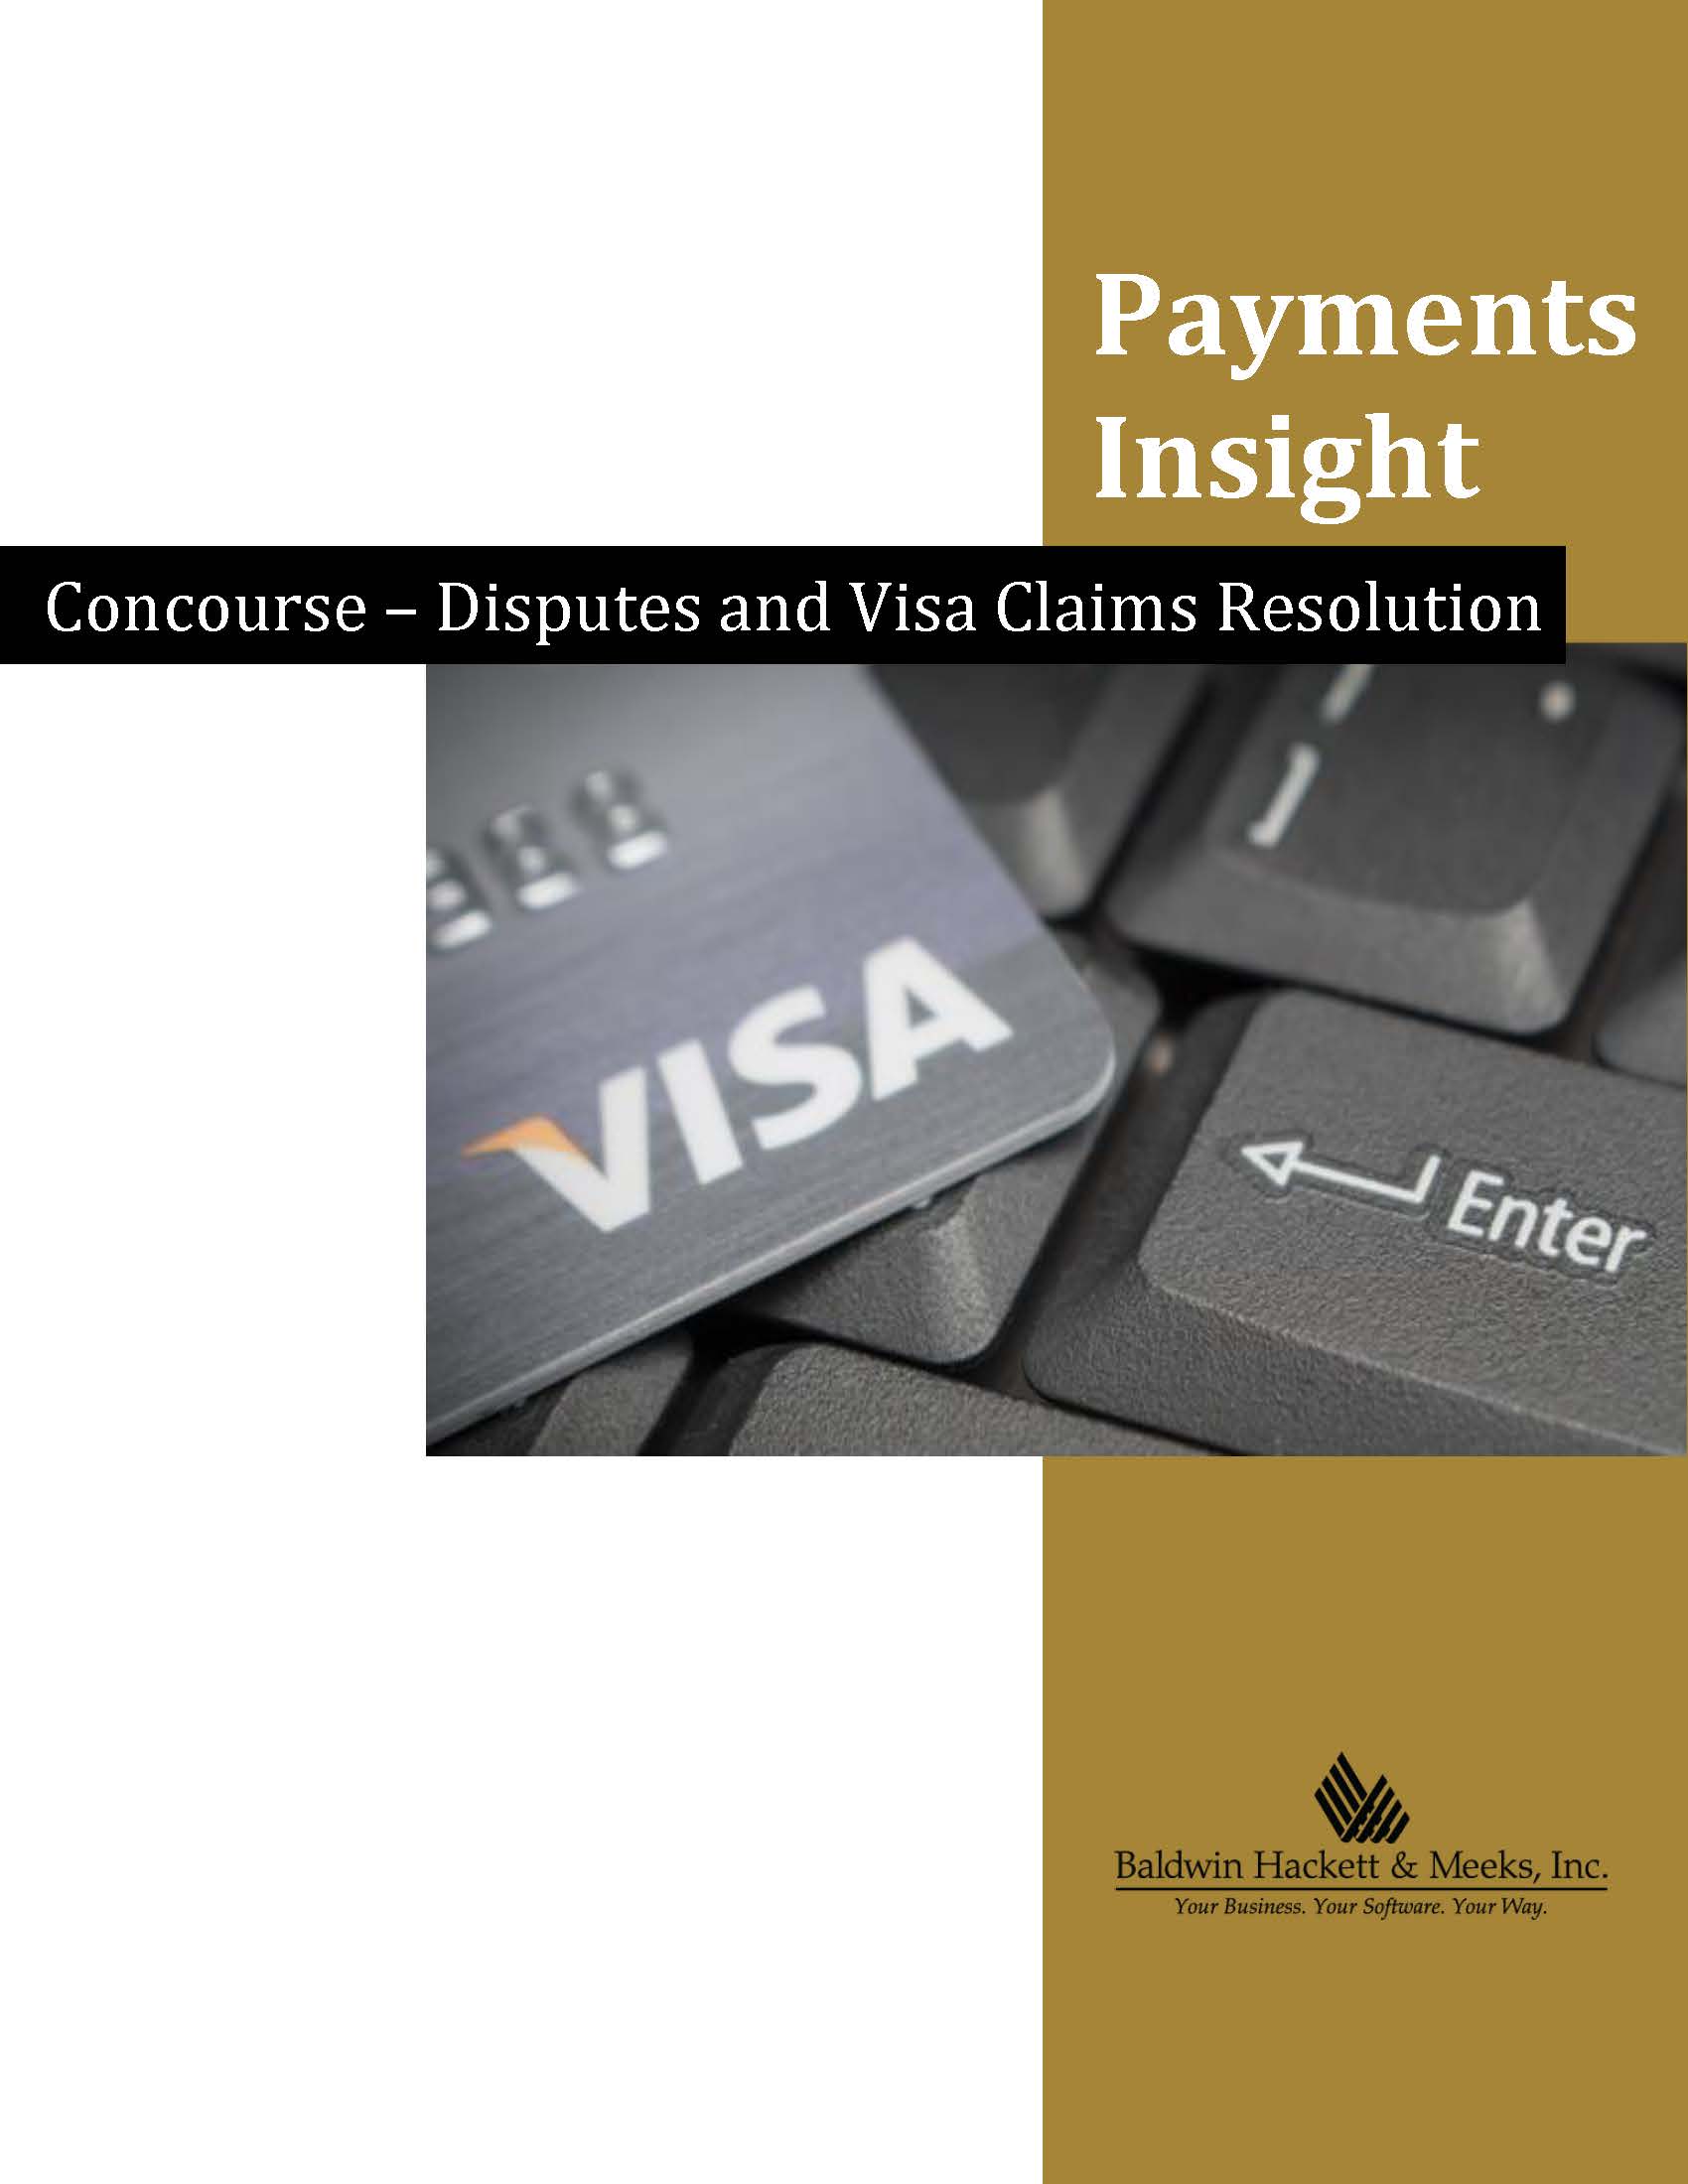 PAYMENTS INSIGHT: CONCOURSE – DISPUTES AND VISA CLAIMS RESOLUTION